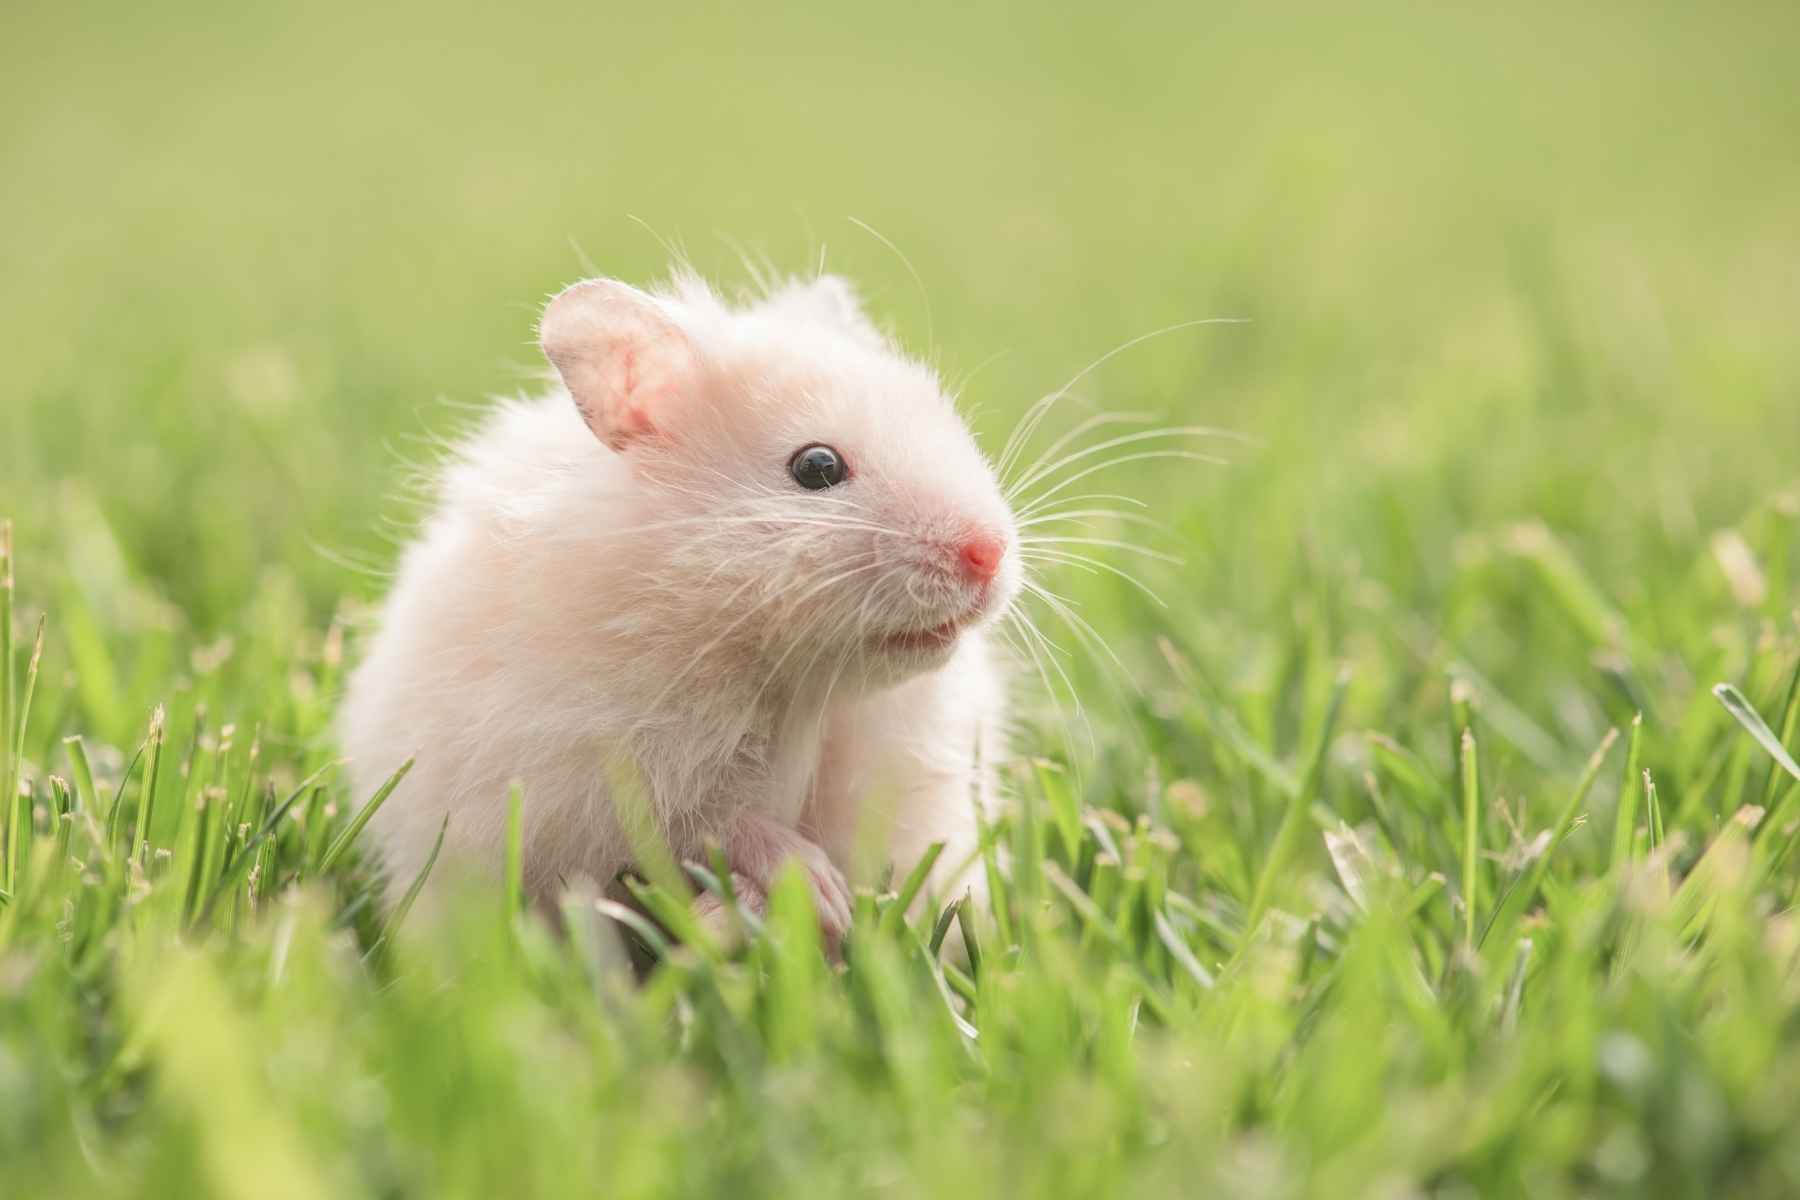 A lost hamster on a lawn